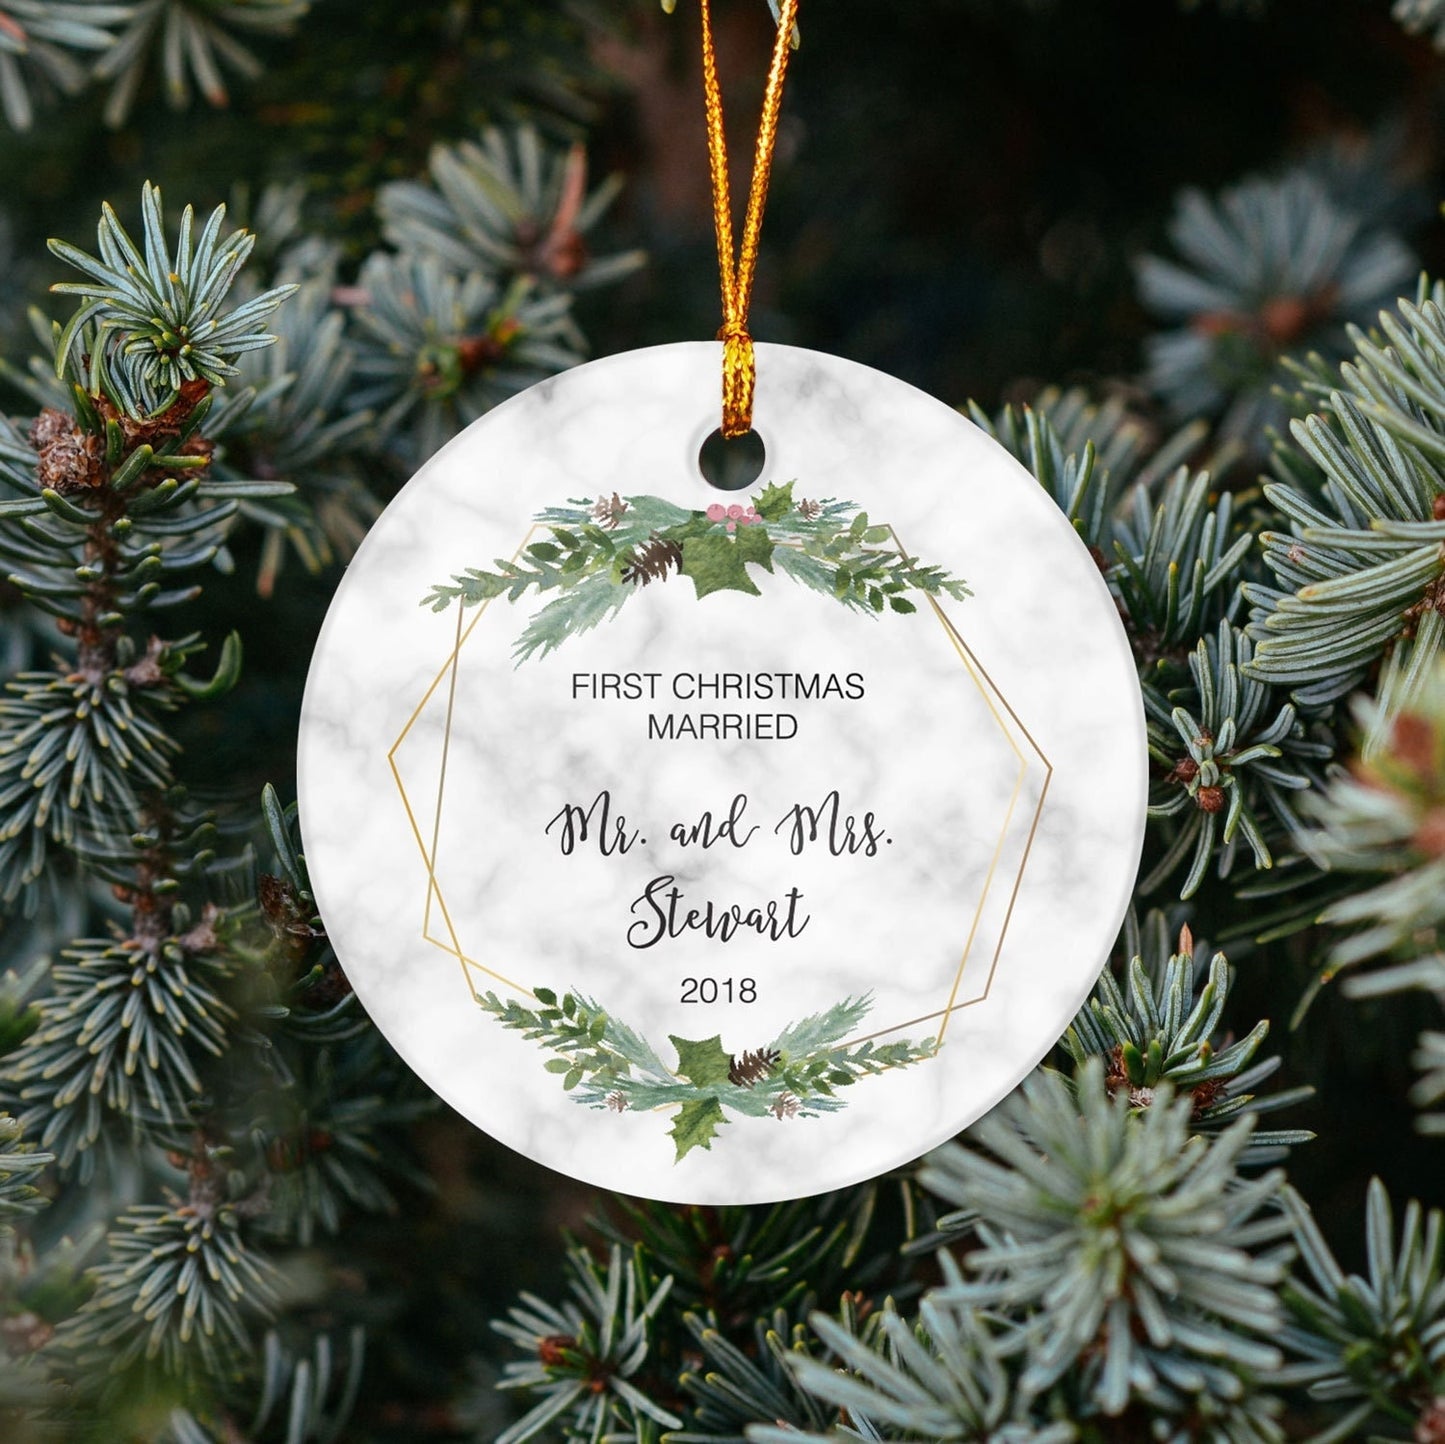 Personalized First Christmas Married Ornament - Gift for the Couple - Wedding Gift - Our First Christmas - Mr and Mrs - OR16